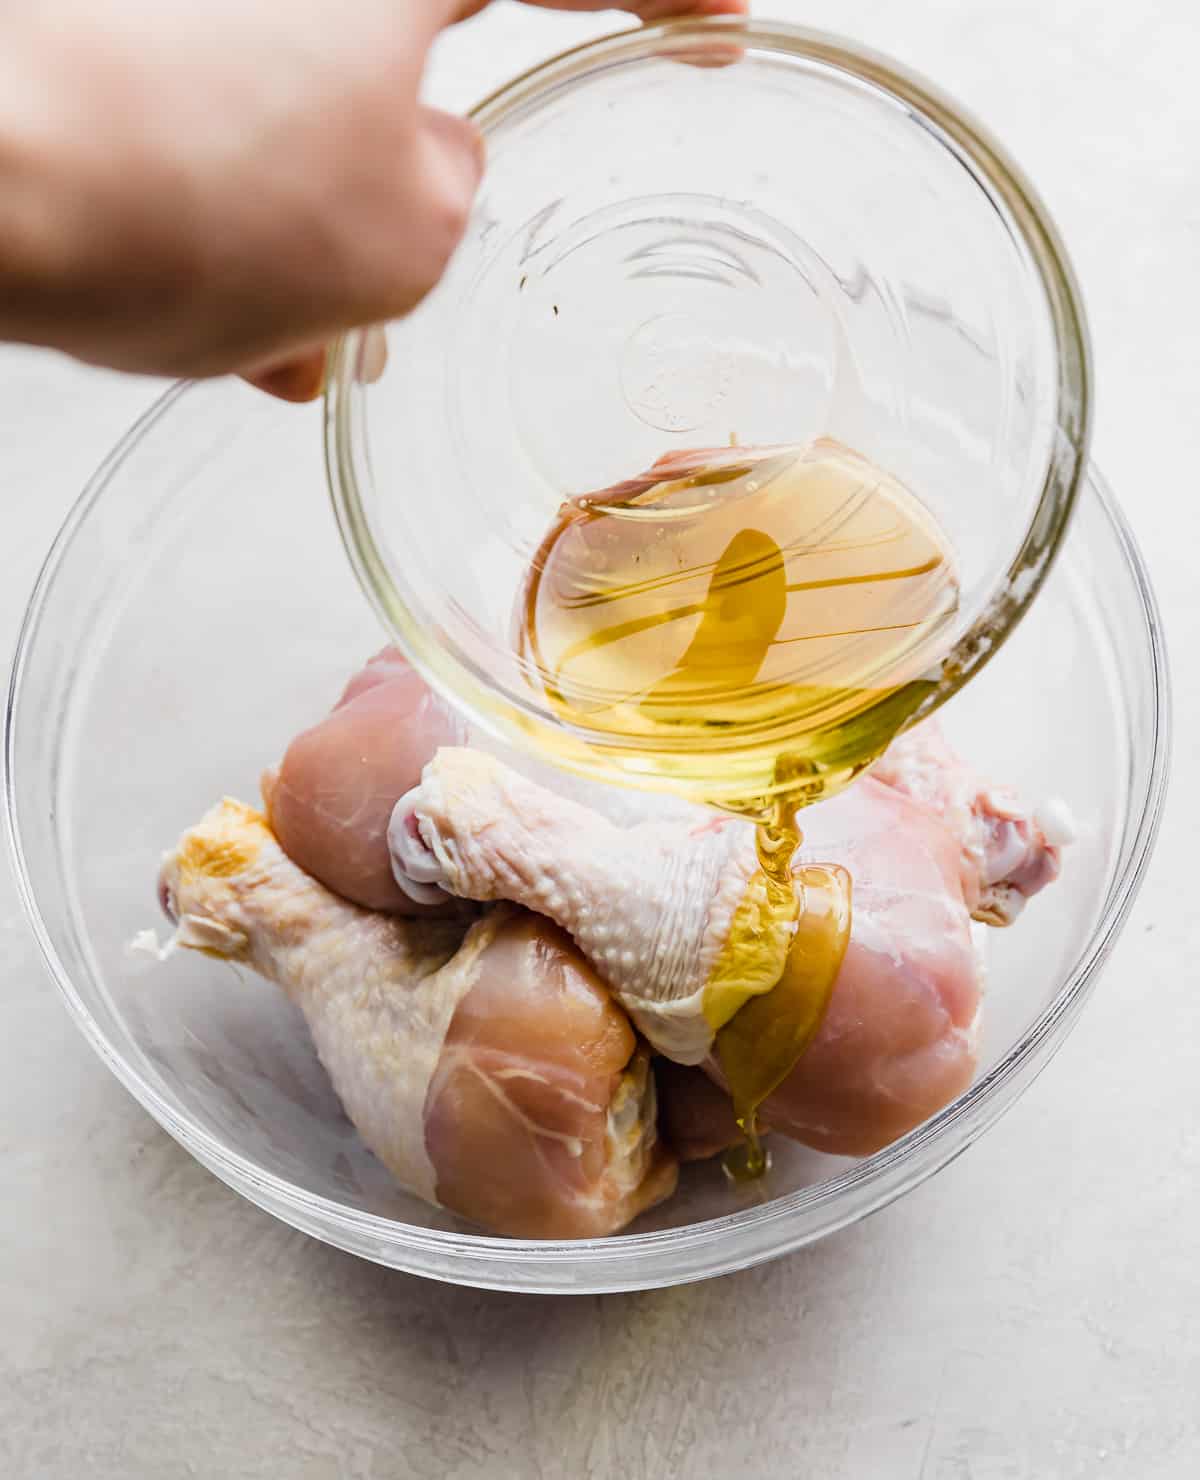 Olive oil being poured overtop chicken drumsticks that are in a glass bowl.